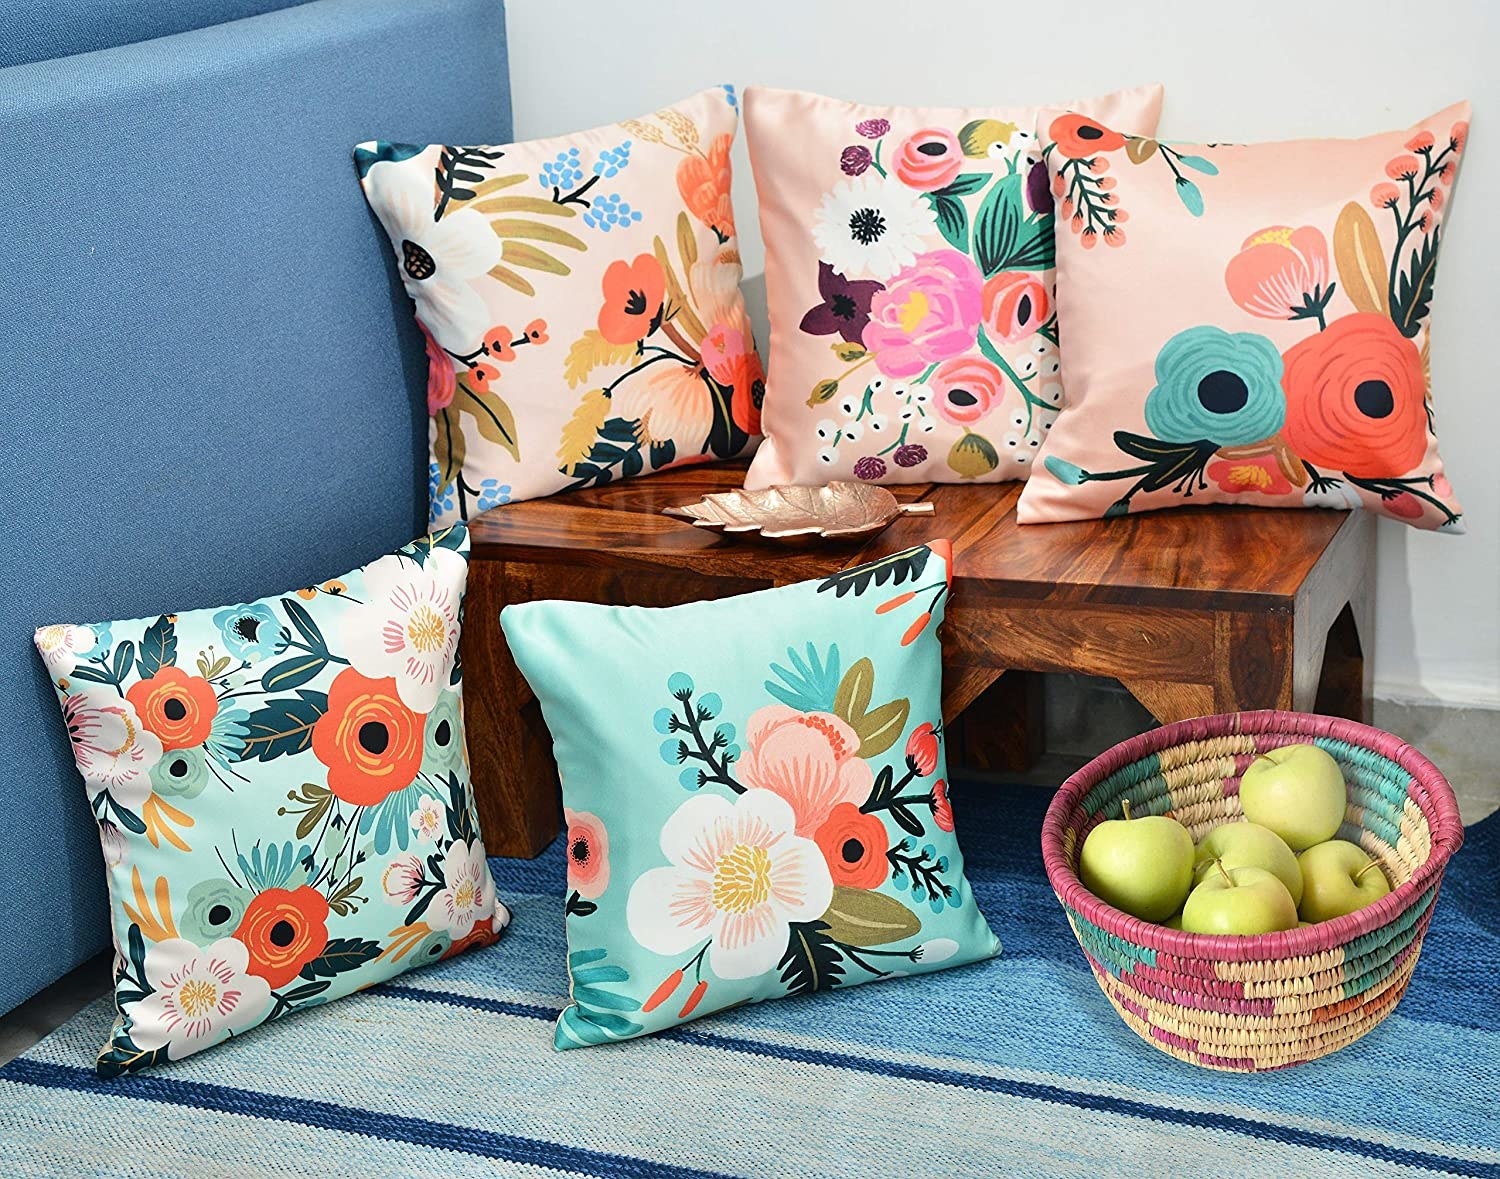 Floral cushions on a sofa next to some apples